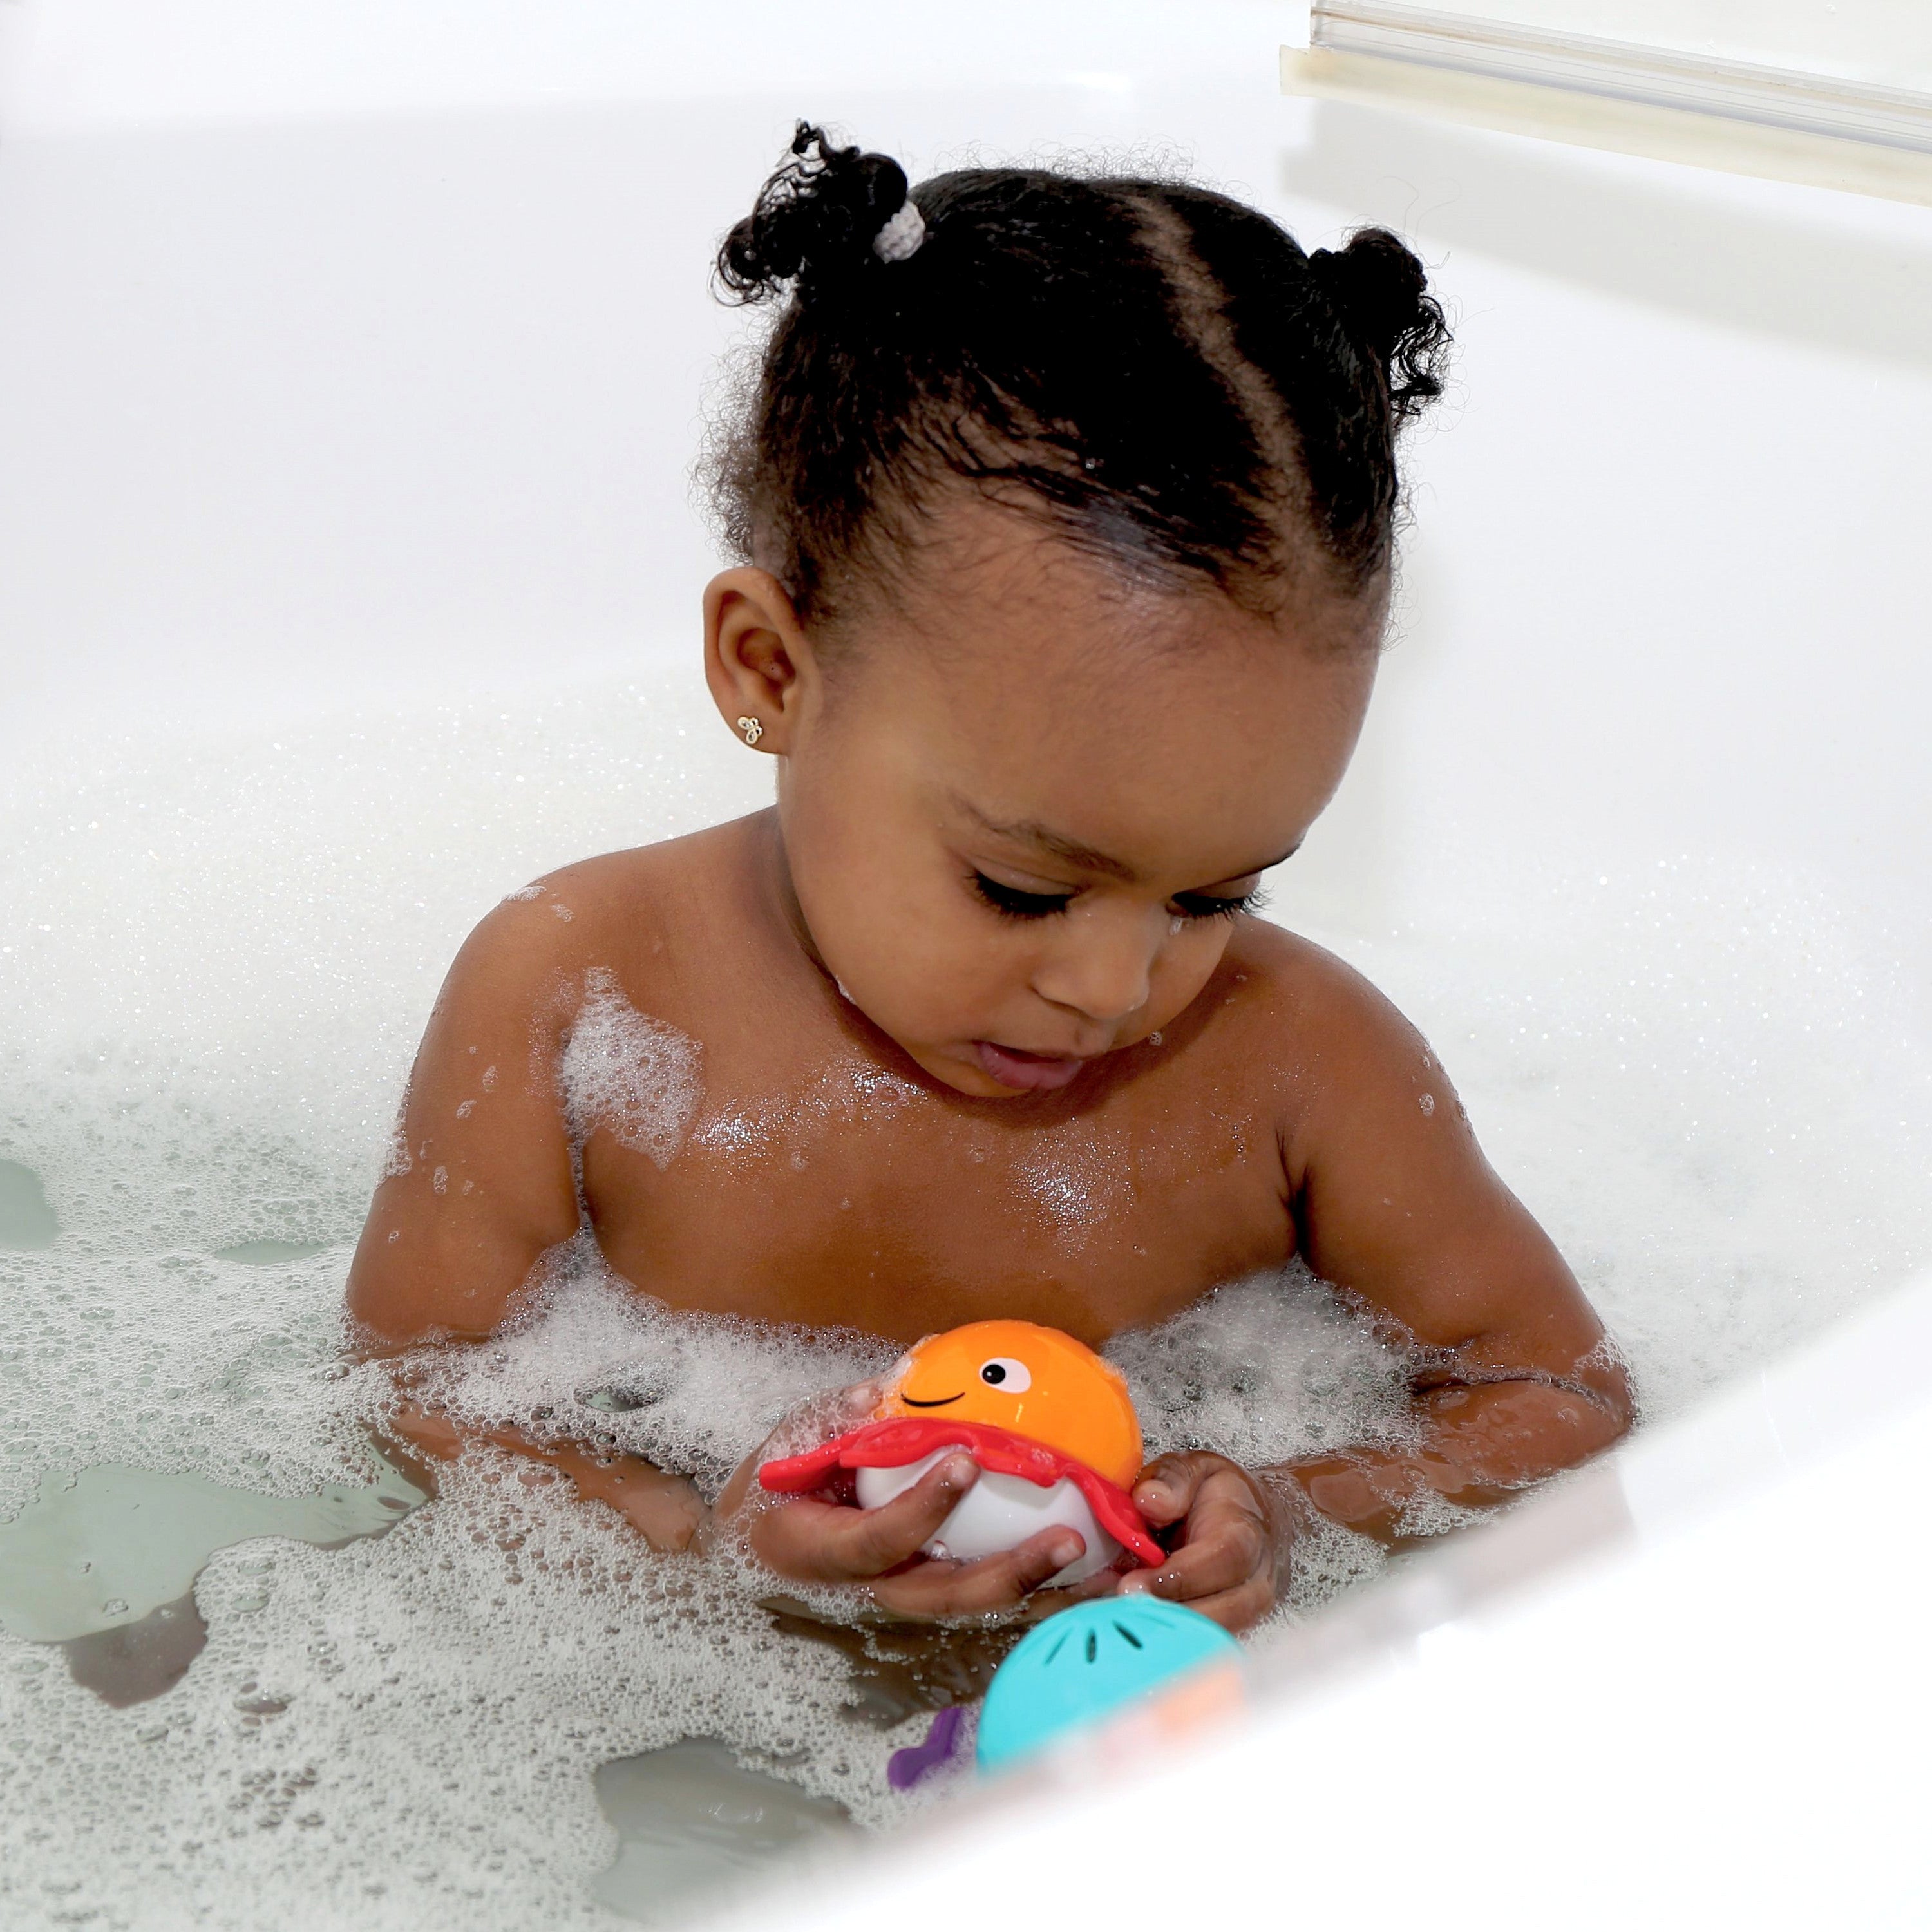 Edushape Tub Buddies, With floating heads and friendly faces, this Edushape Tub Buddies bath toy keeps babies entertained during bath time. These Edushape Tub Buddies are great for hand-eye coordination and fine motor skills, the Edushape Tub Buddies are a relaxing tub time activity for little ones who love to make a splash! These fun little bath time pals are perfectly shaped for little hands to grip easily, whilst being great for both visual and tactile sensory development. Dunk, drain and repeat for lots